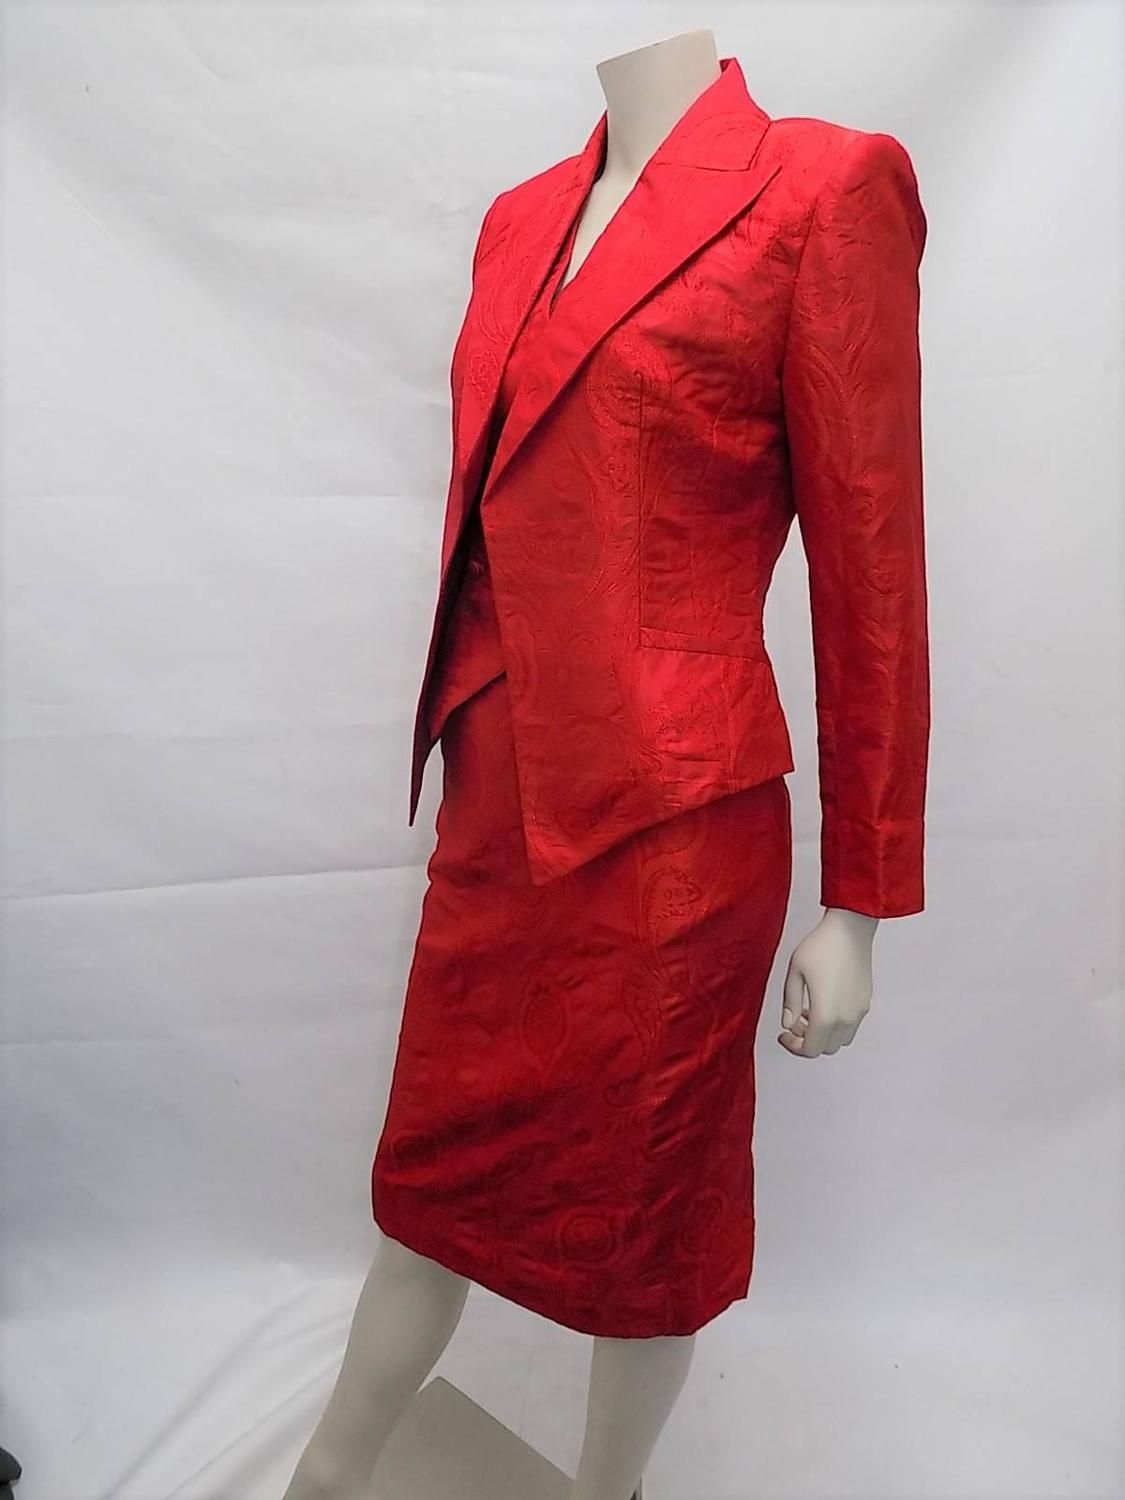 Hermes Vintage Red Silk Brocade 3 Pc skirt suit Fabulous !!! For Sale ...